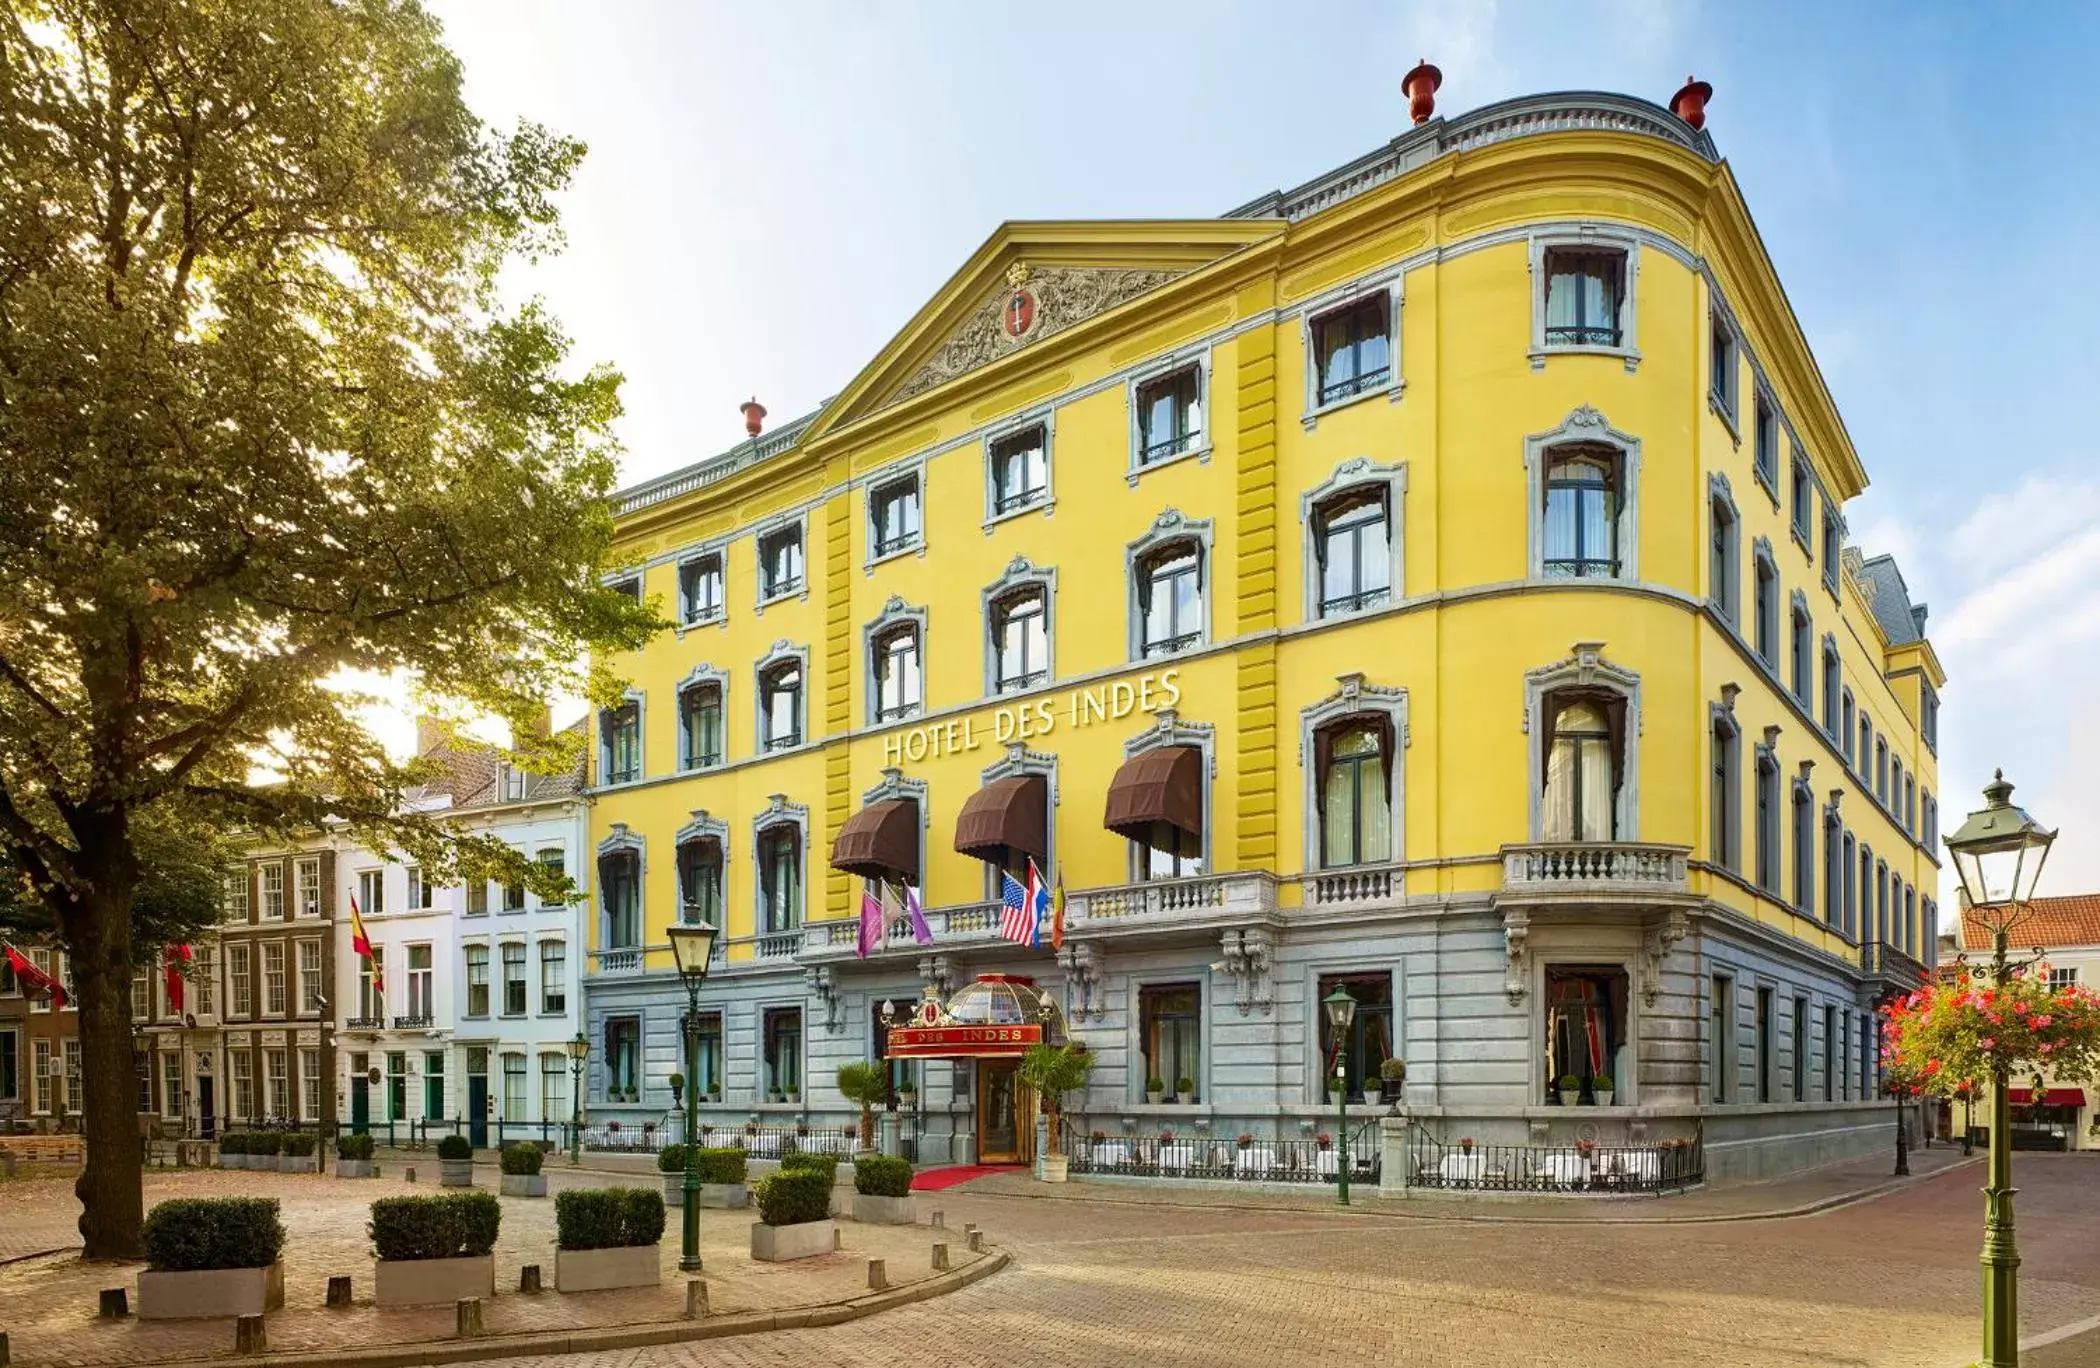 Property Building in Hotel Des Indes The Hague